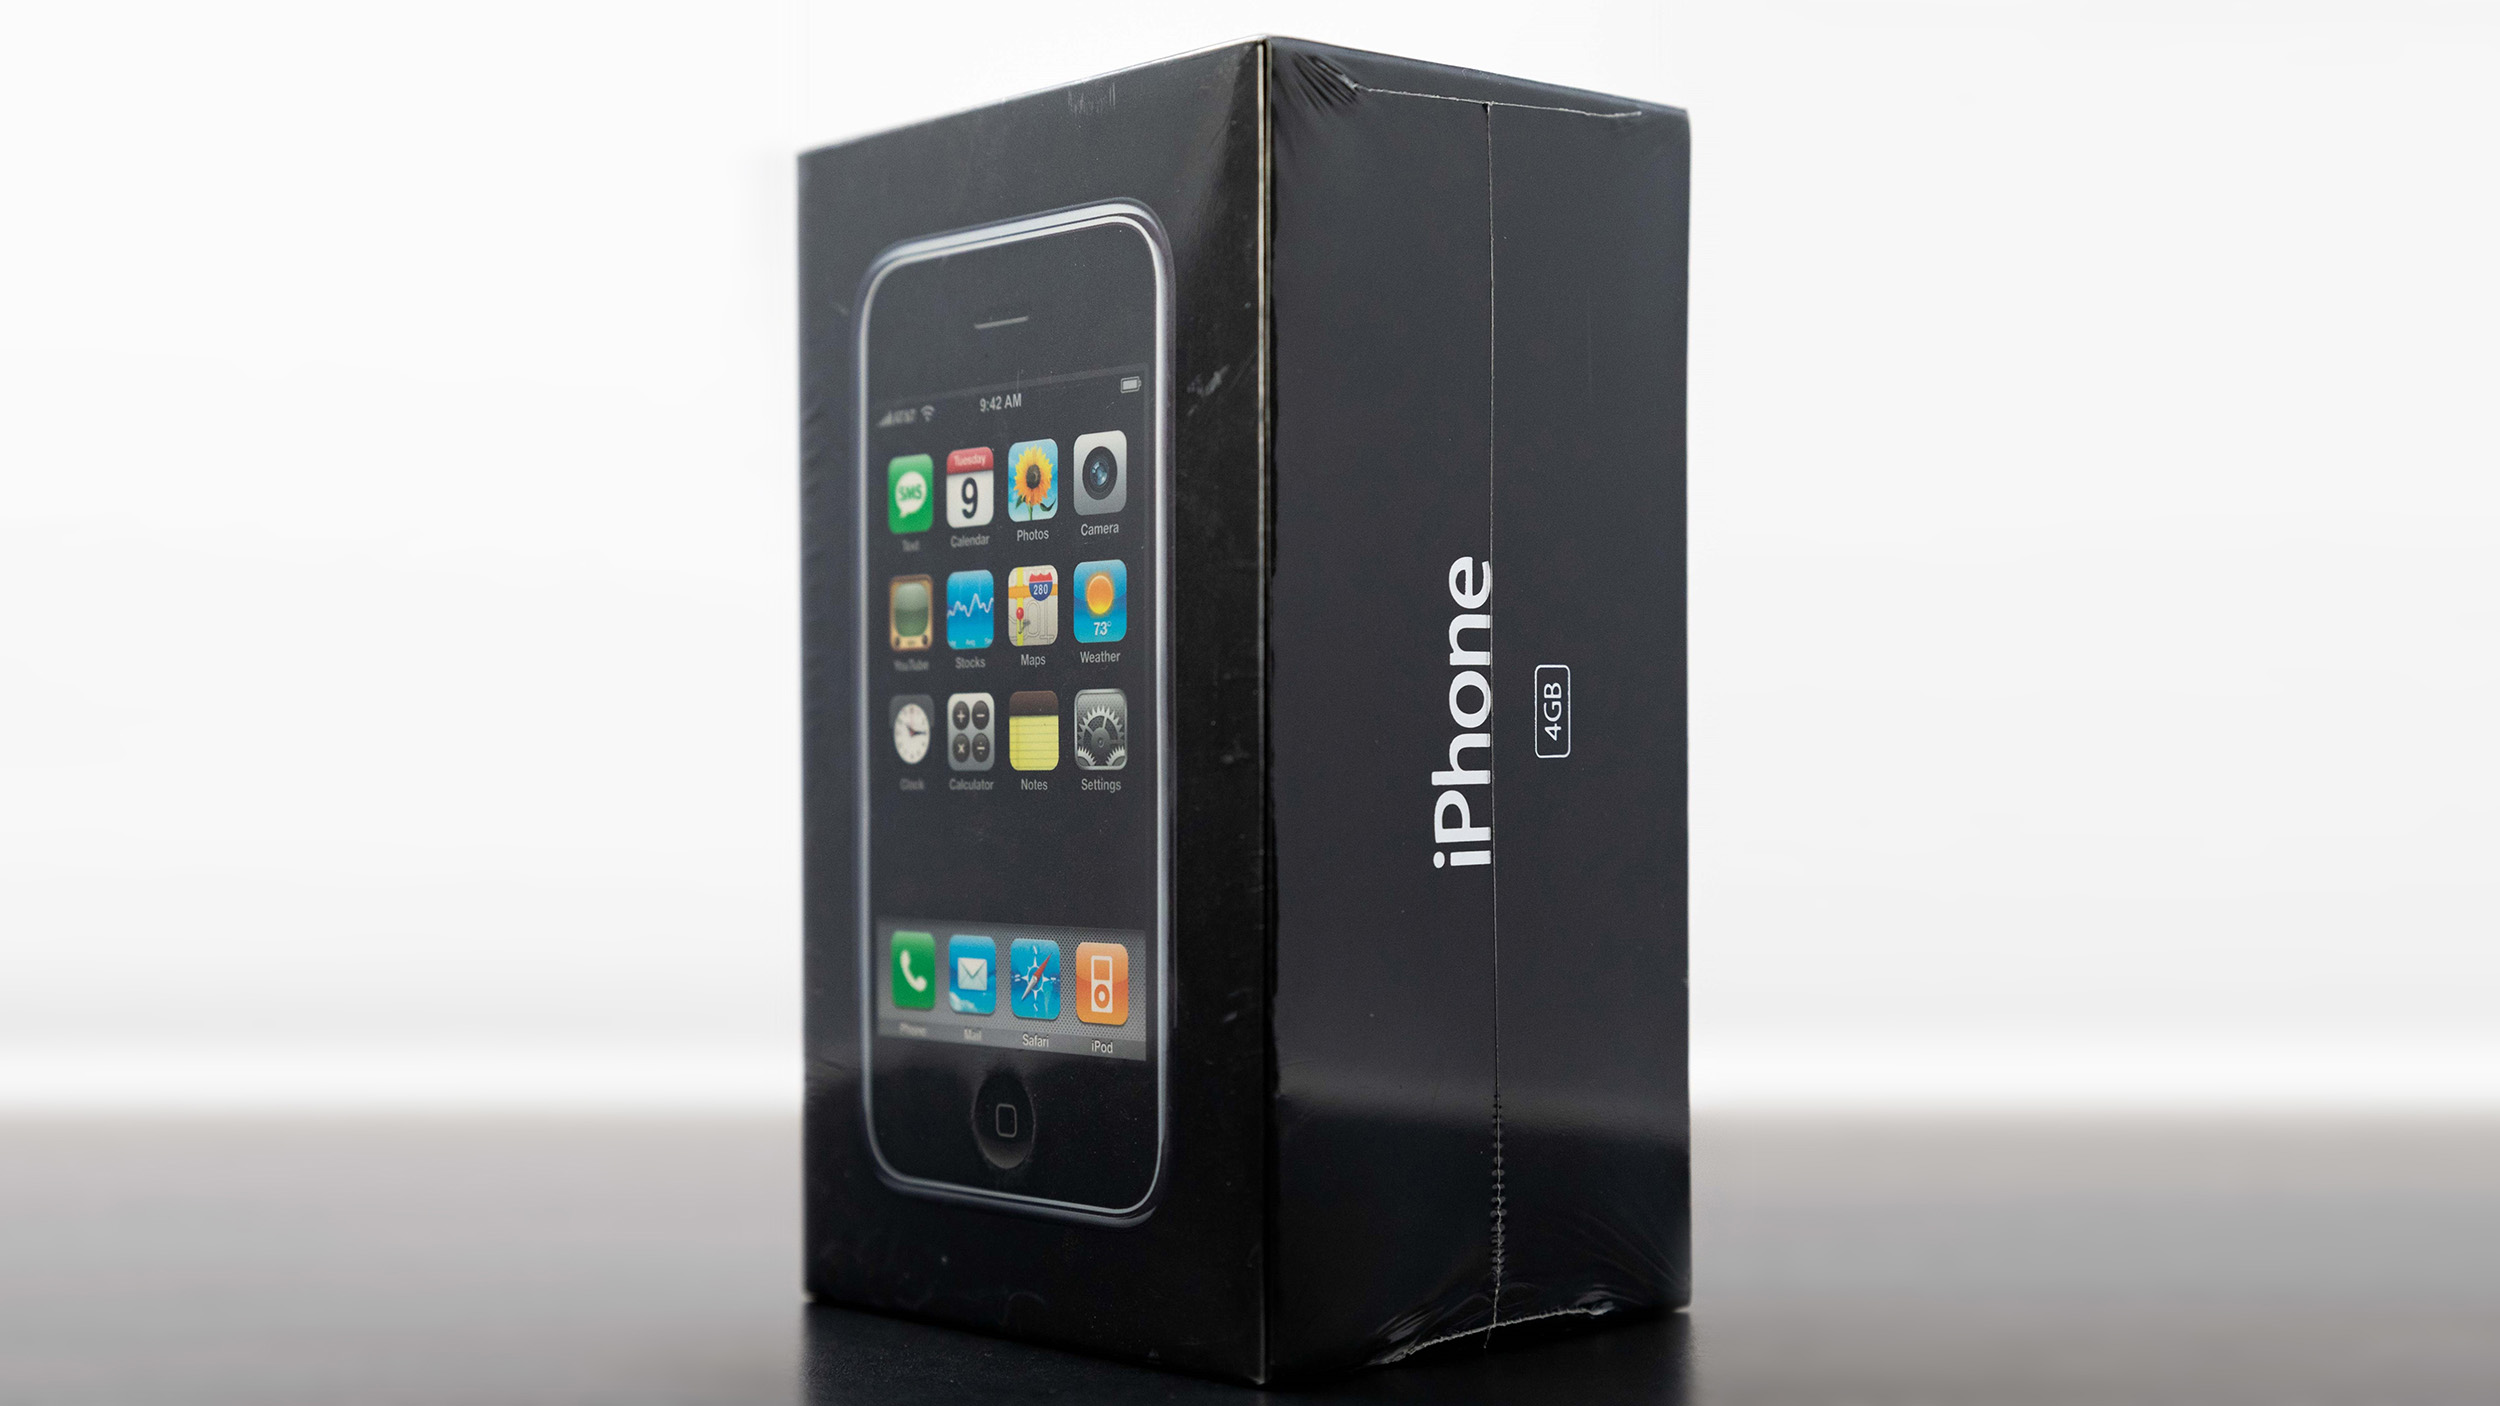 Rare 4GB Original iPhone Sells for Record $190,000 at Auction